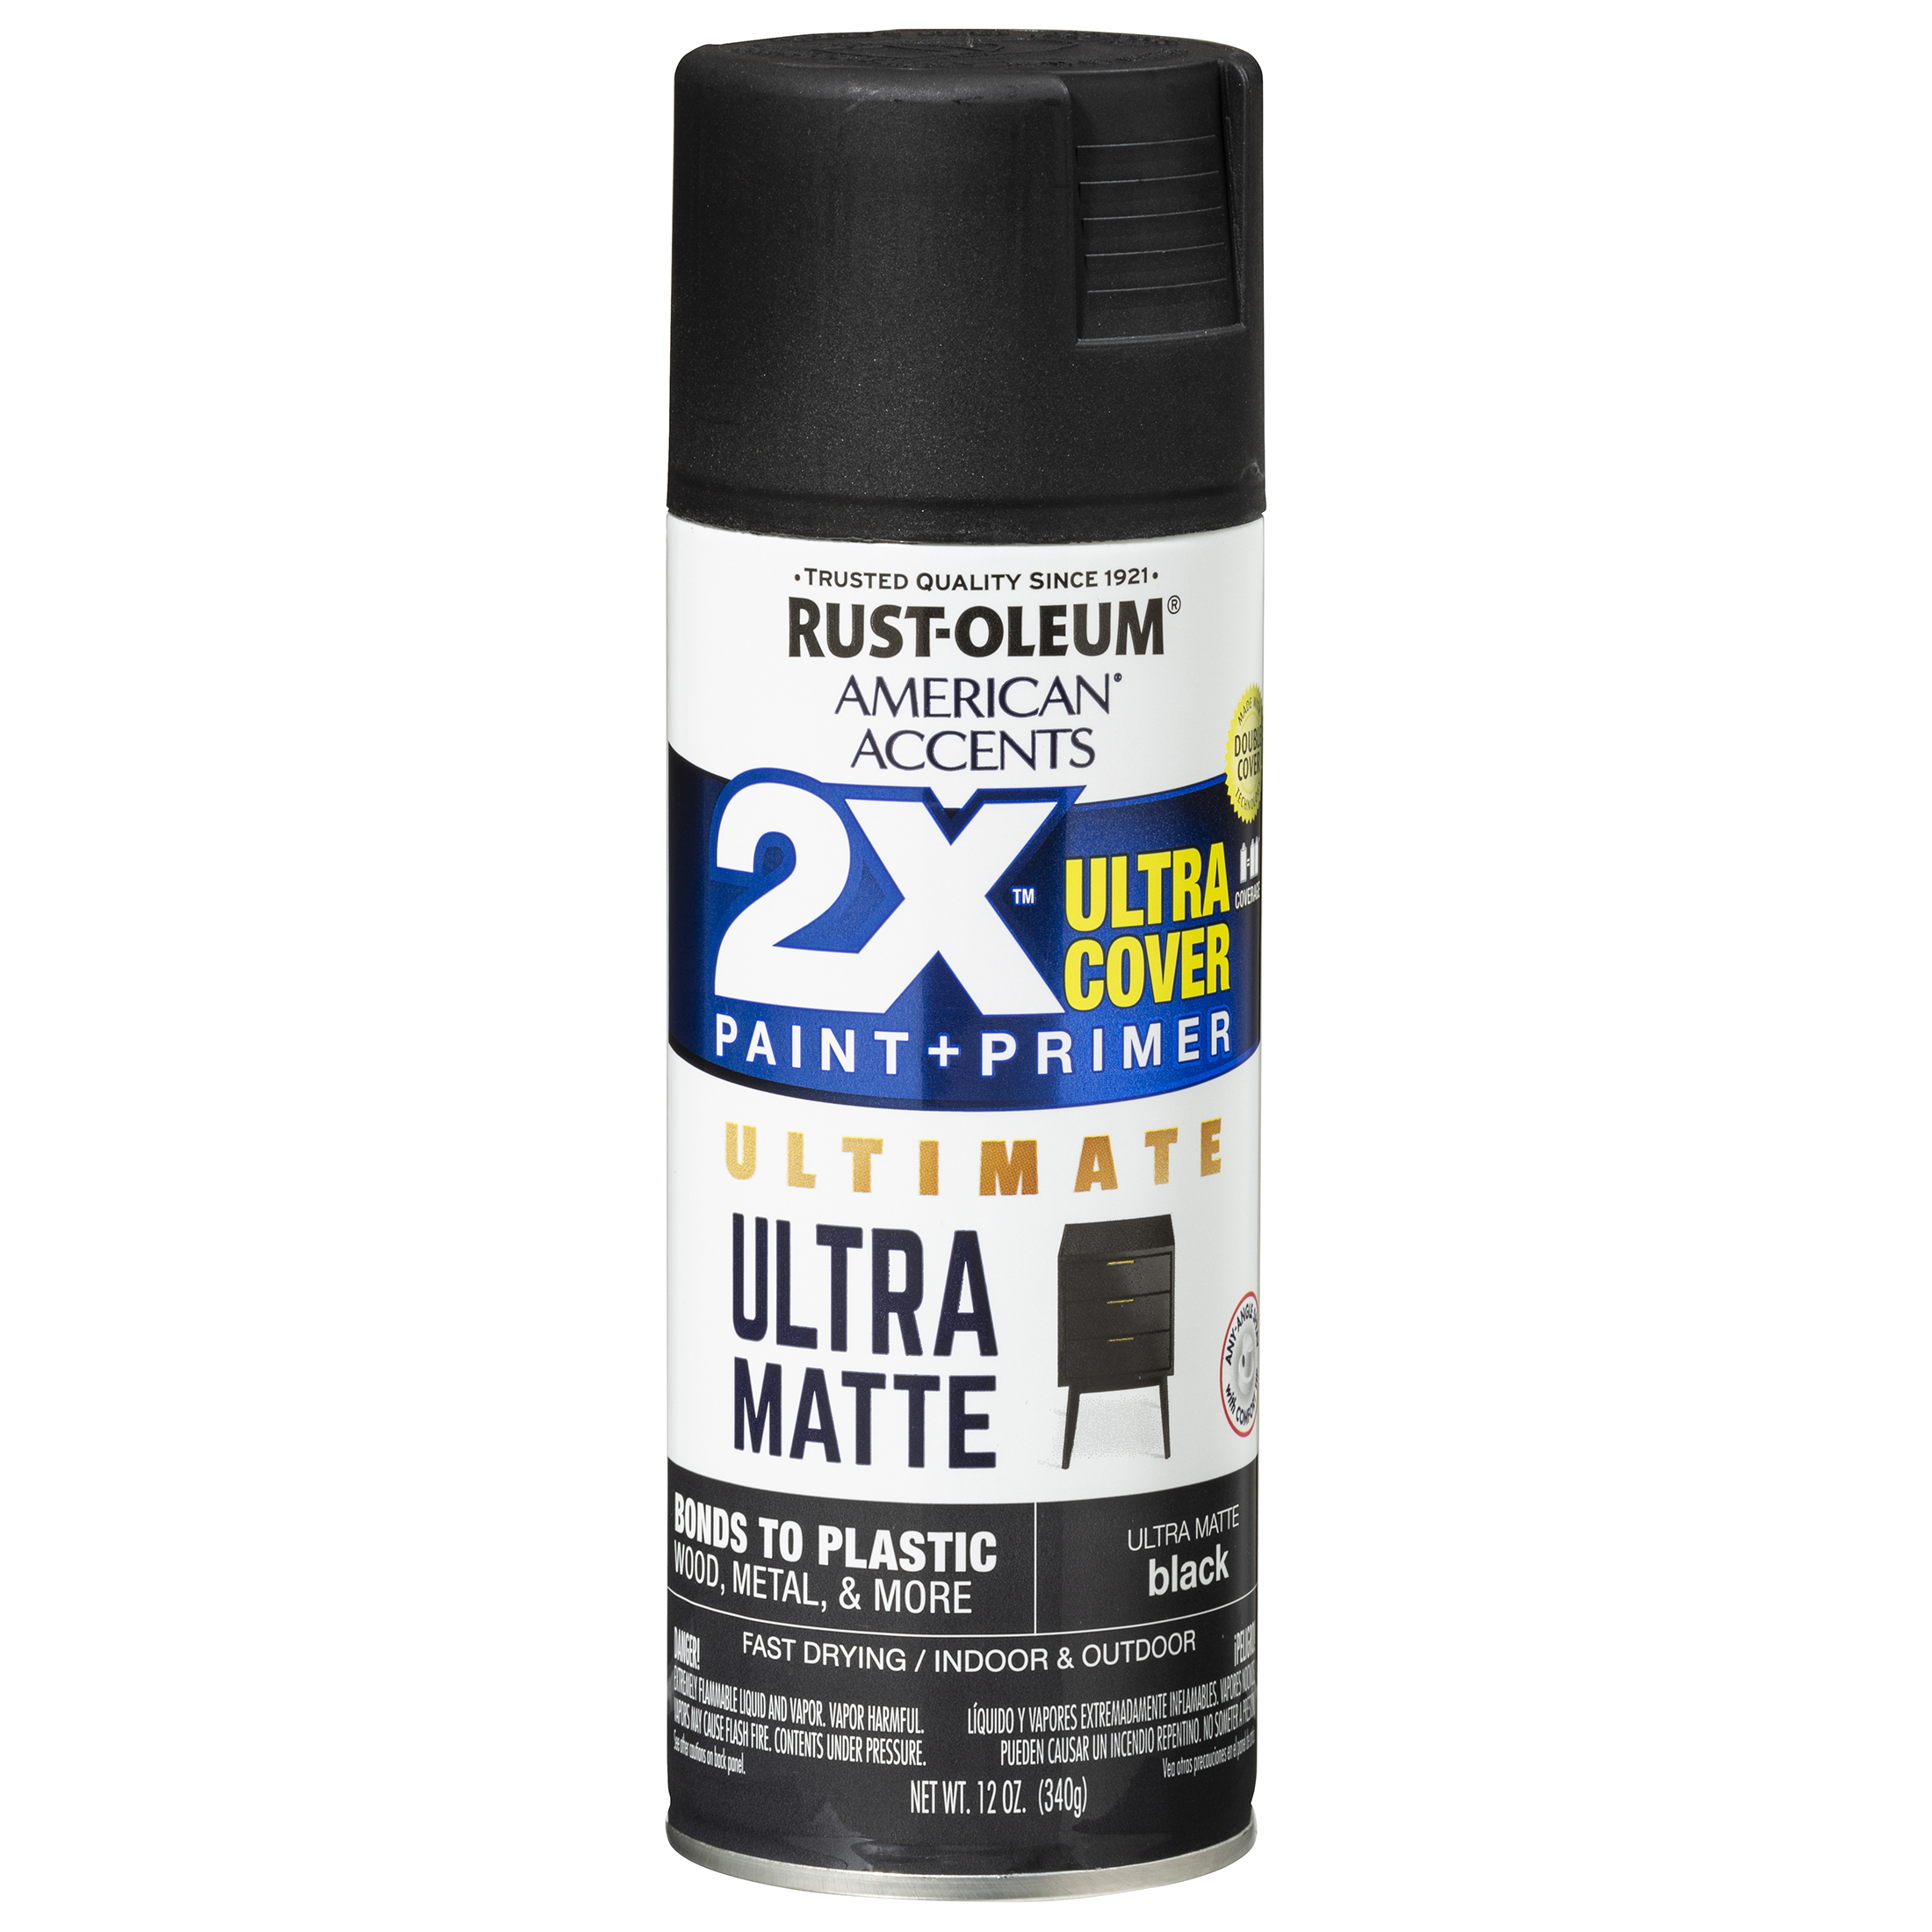 Rust-Oleum American Accents 2x Ultra Cover Ultra Matte Black Spray Paint and Primer in 1, 12 oz, Size: 12 oz Spray